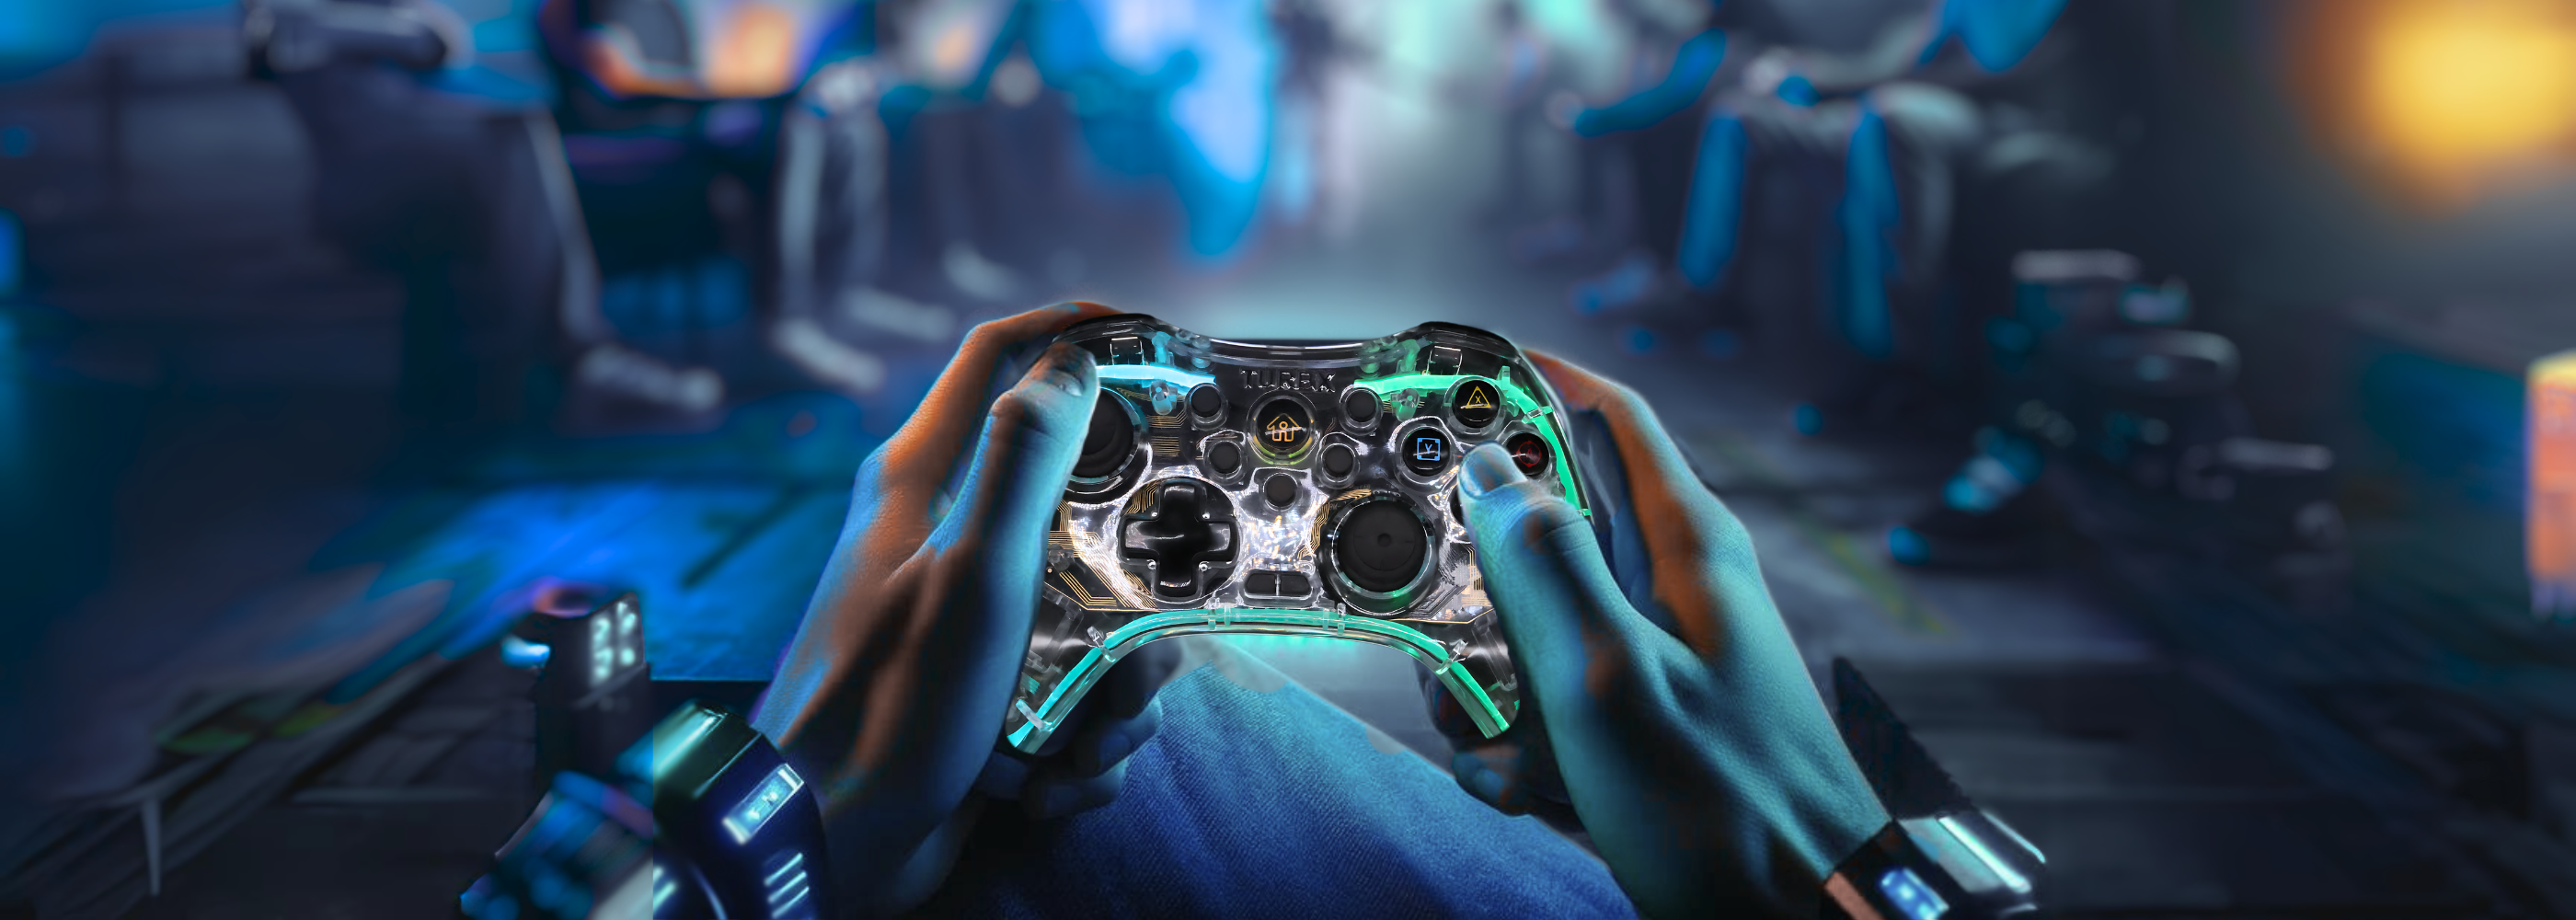 Turbx gaming controllers and gamepads displayed on a dynamic Cross-platform Video gaming setup, highlighting portability and LED RGB, Polarized chrome color style for cloud gaming enthusiasts & mobile gamers. Turbx is the go-to game store for gamers seeking stylish, portable, and immersive compact gaming accessories & organizers.